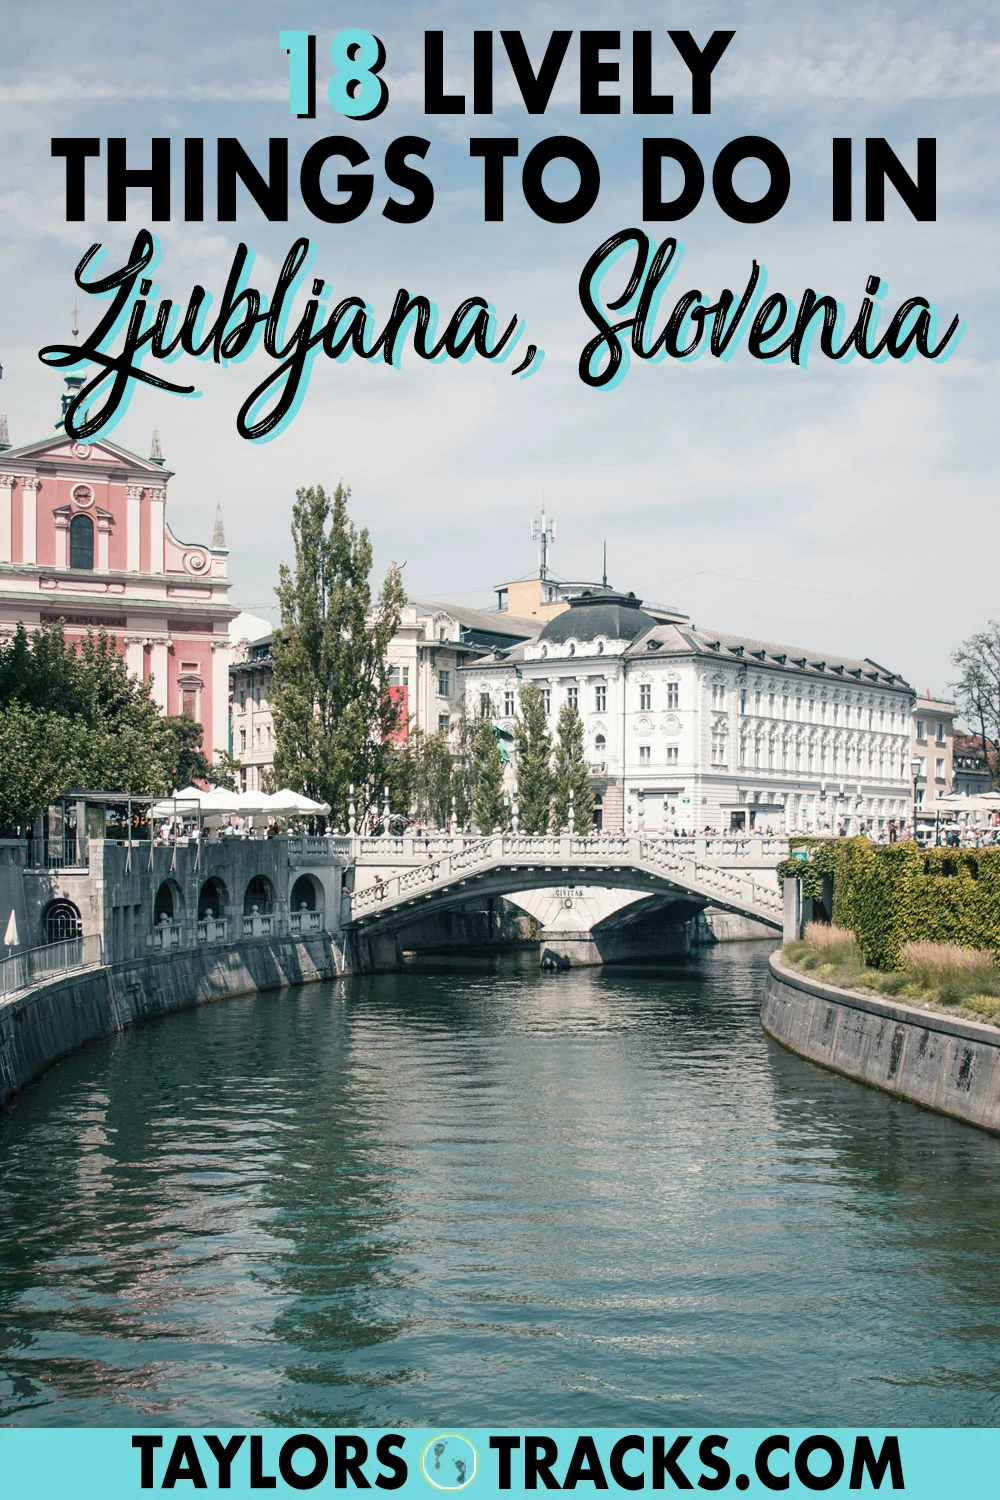 Slovenia travel is not complete without a stop in the country's capital! There are plenty of things to do in Ljubljana from adventurous Ljubljana activities to scenic views from the Ljubljana Castle. Click to the the need-to-know details on what to do in Ljubljana!